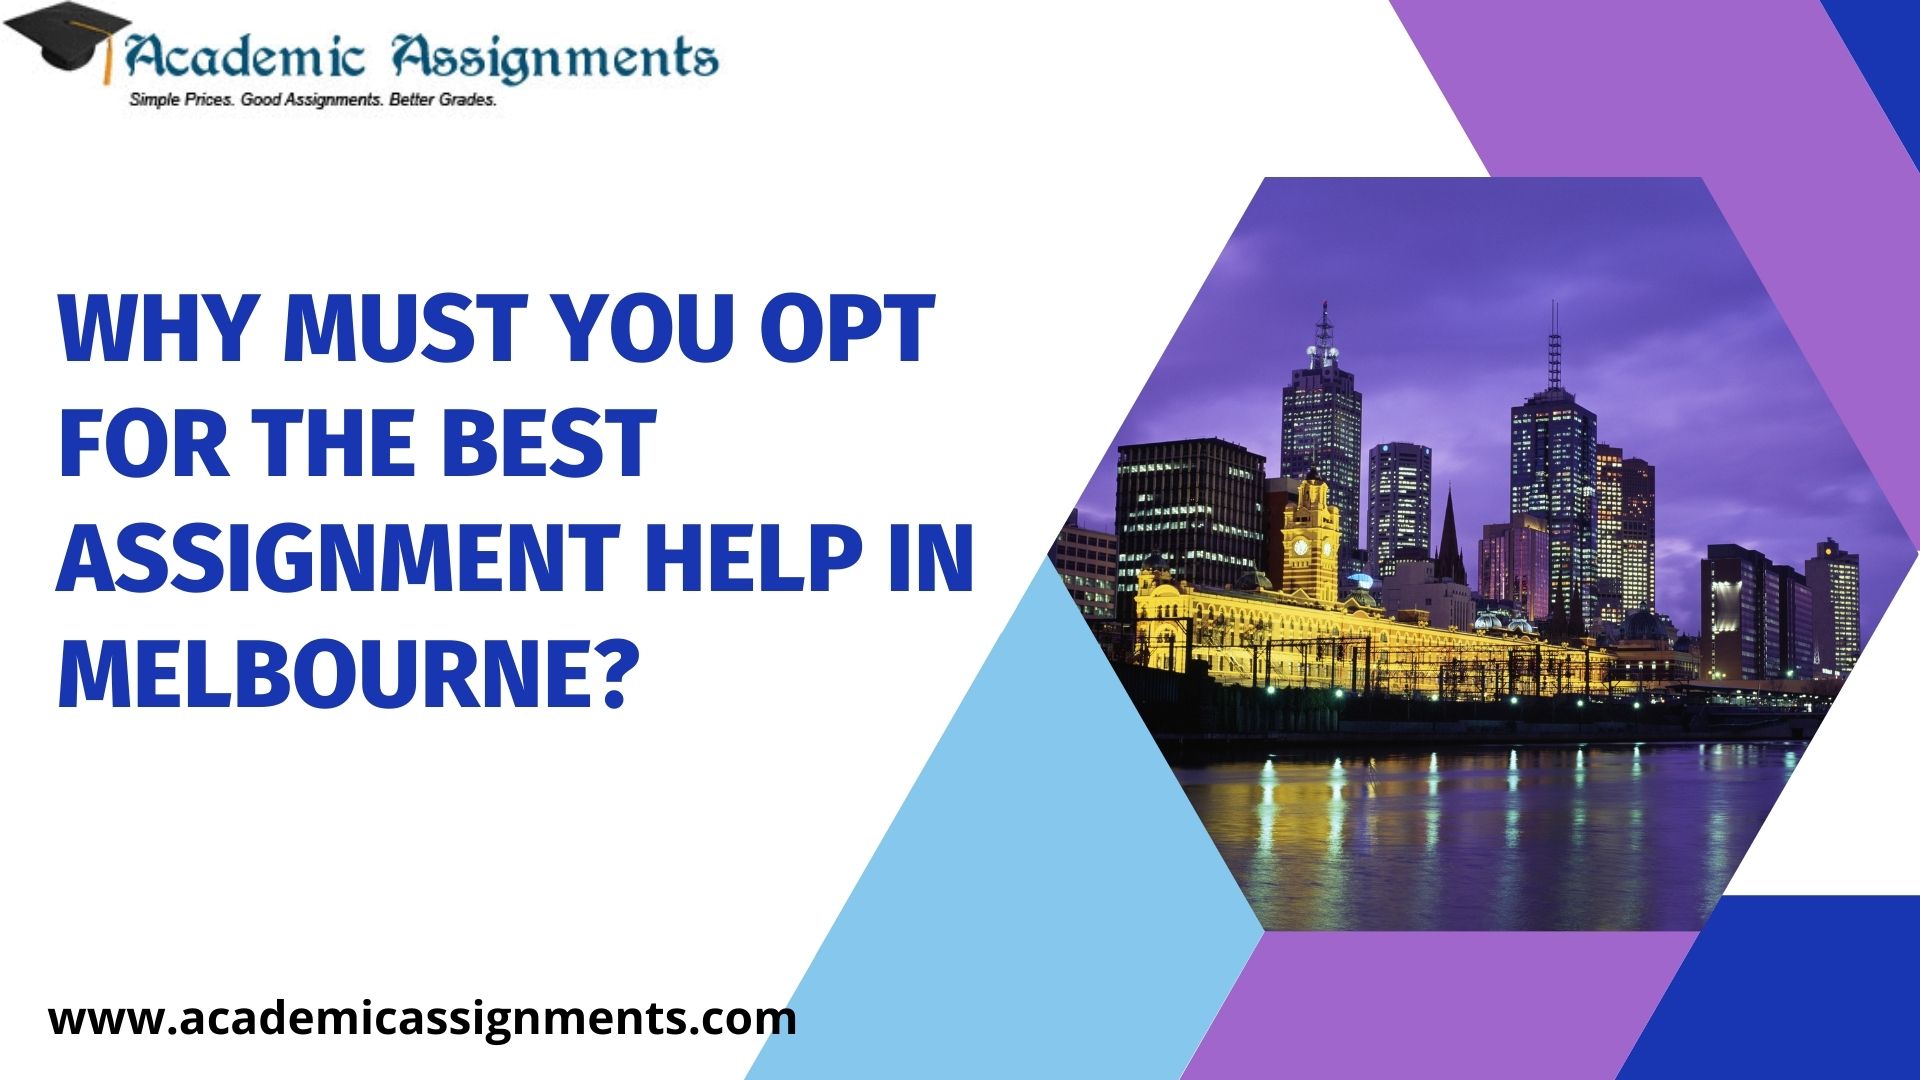 Why Must You Opt For The Best Assignment Help in Melbourne